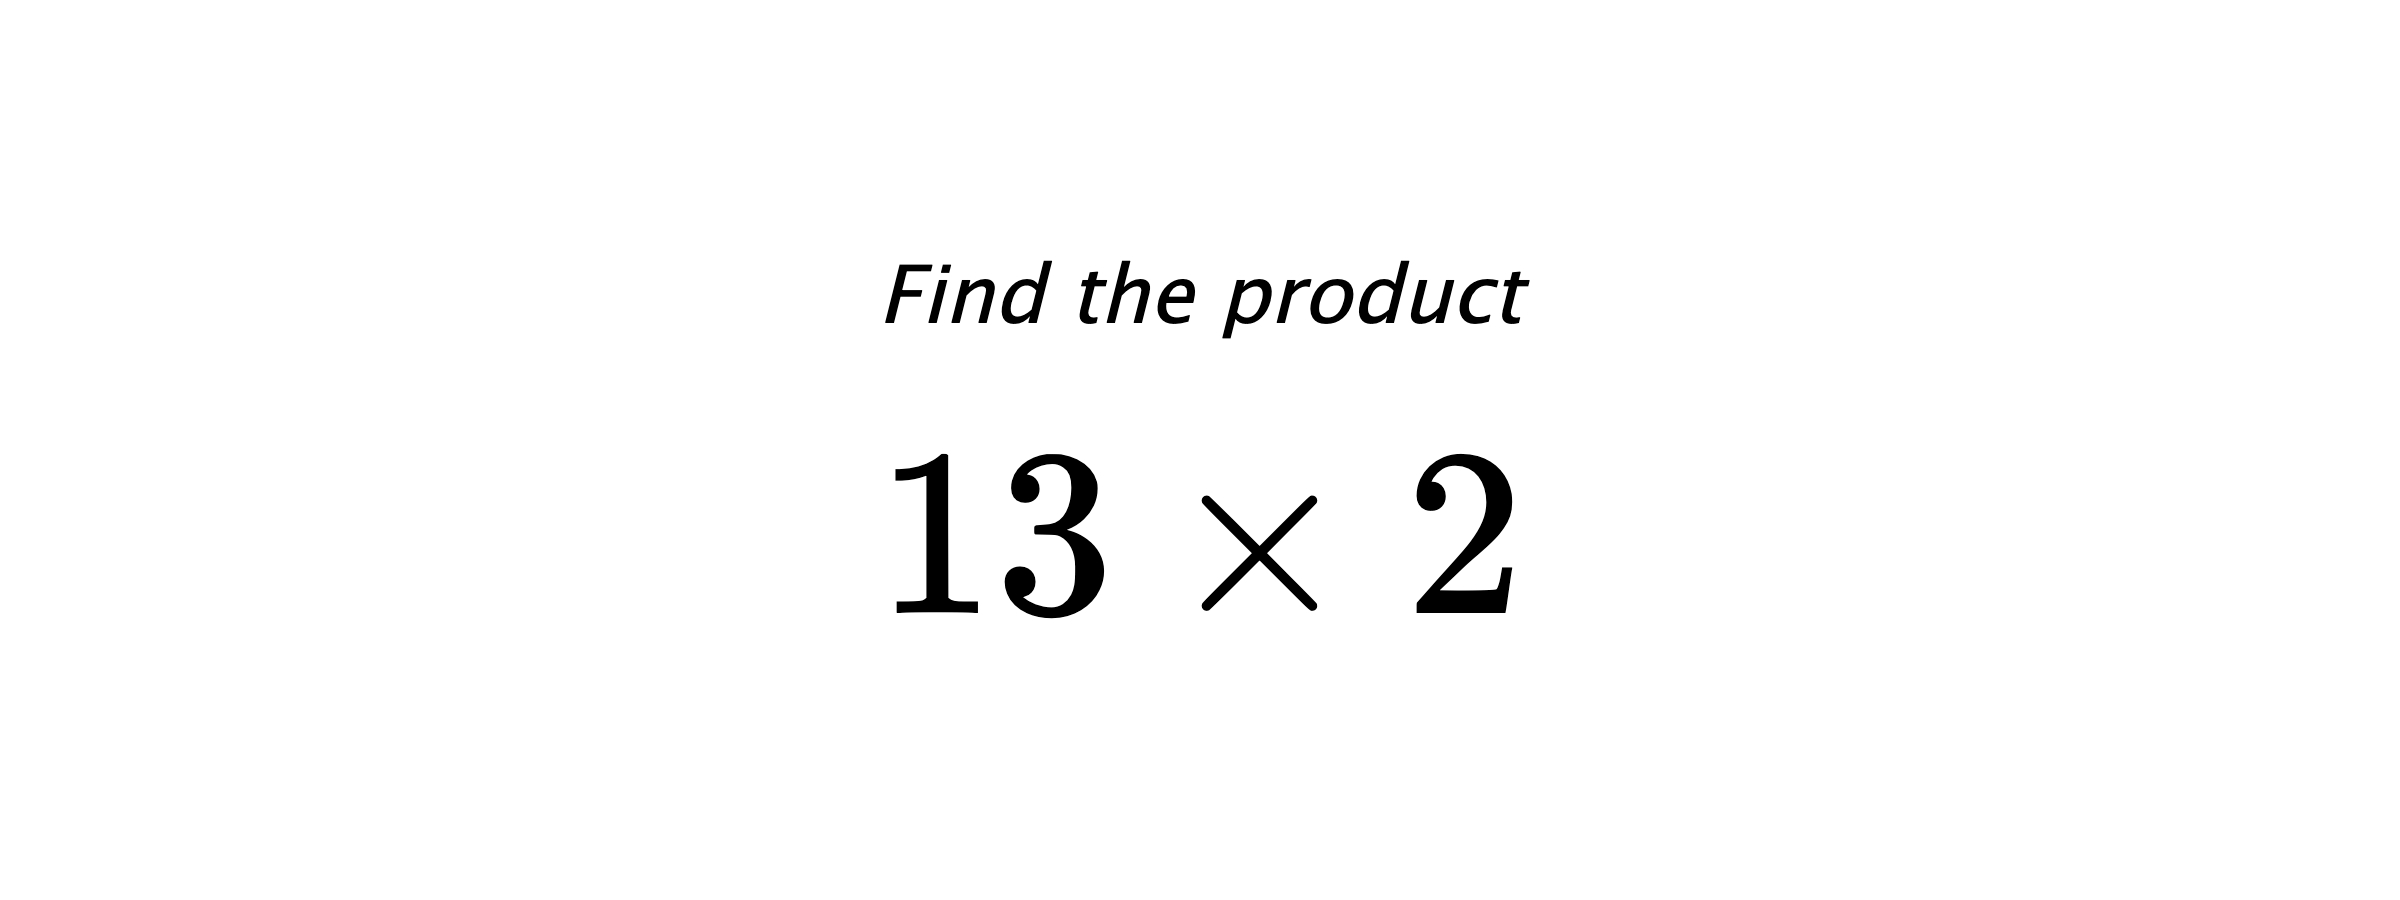 Find the product $ 13 \times 2 $